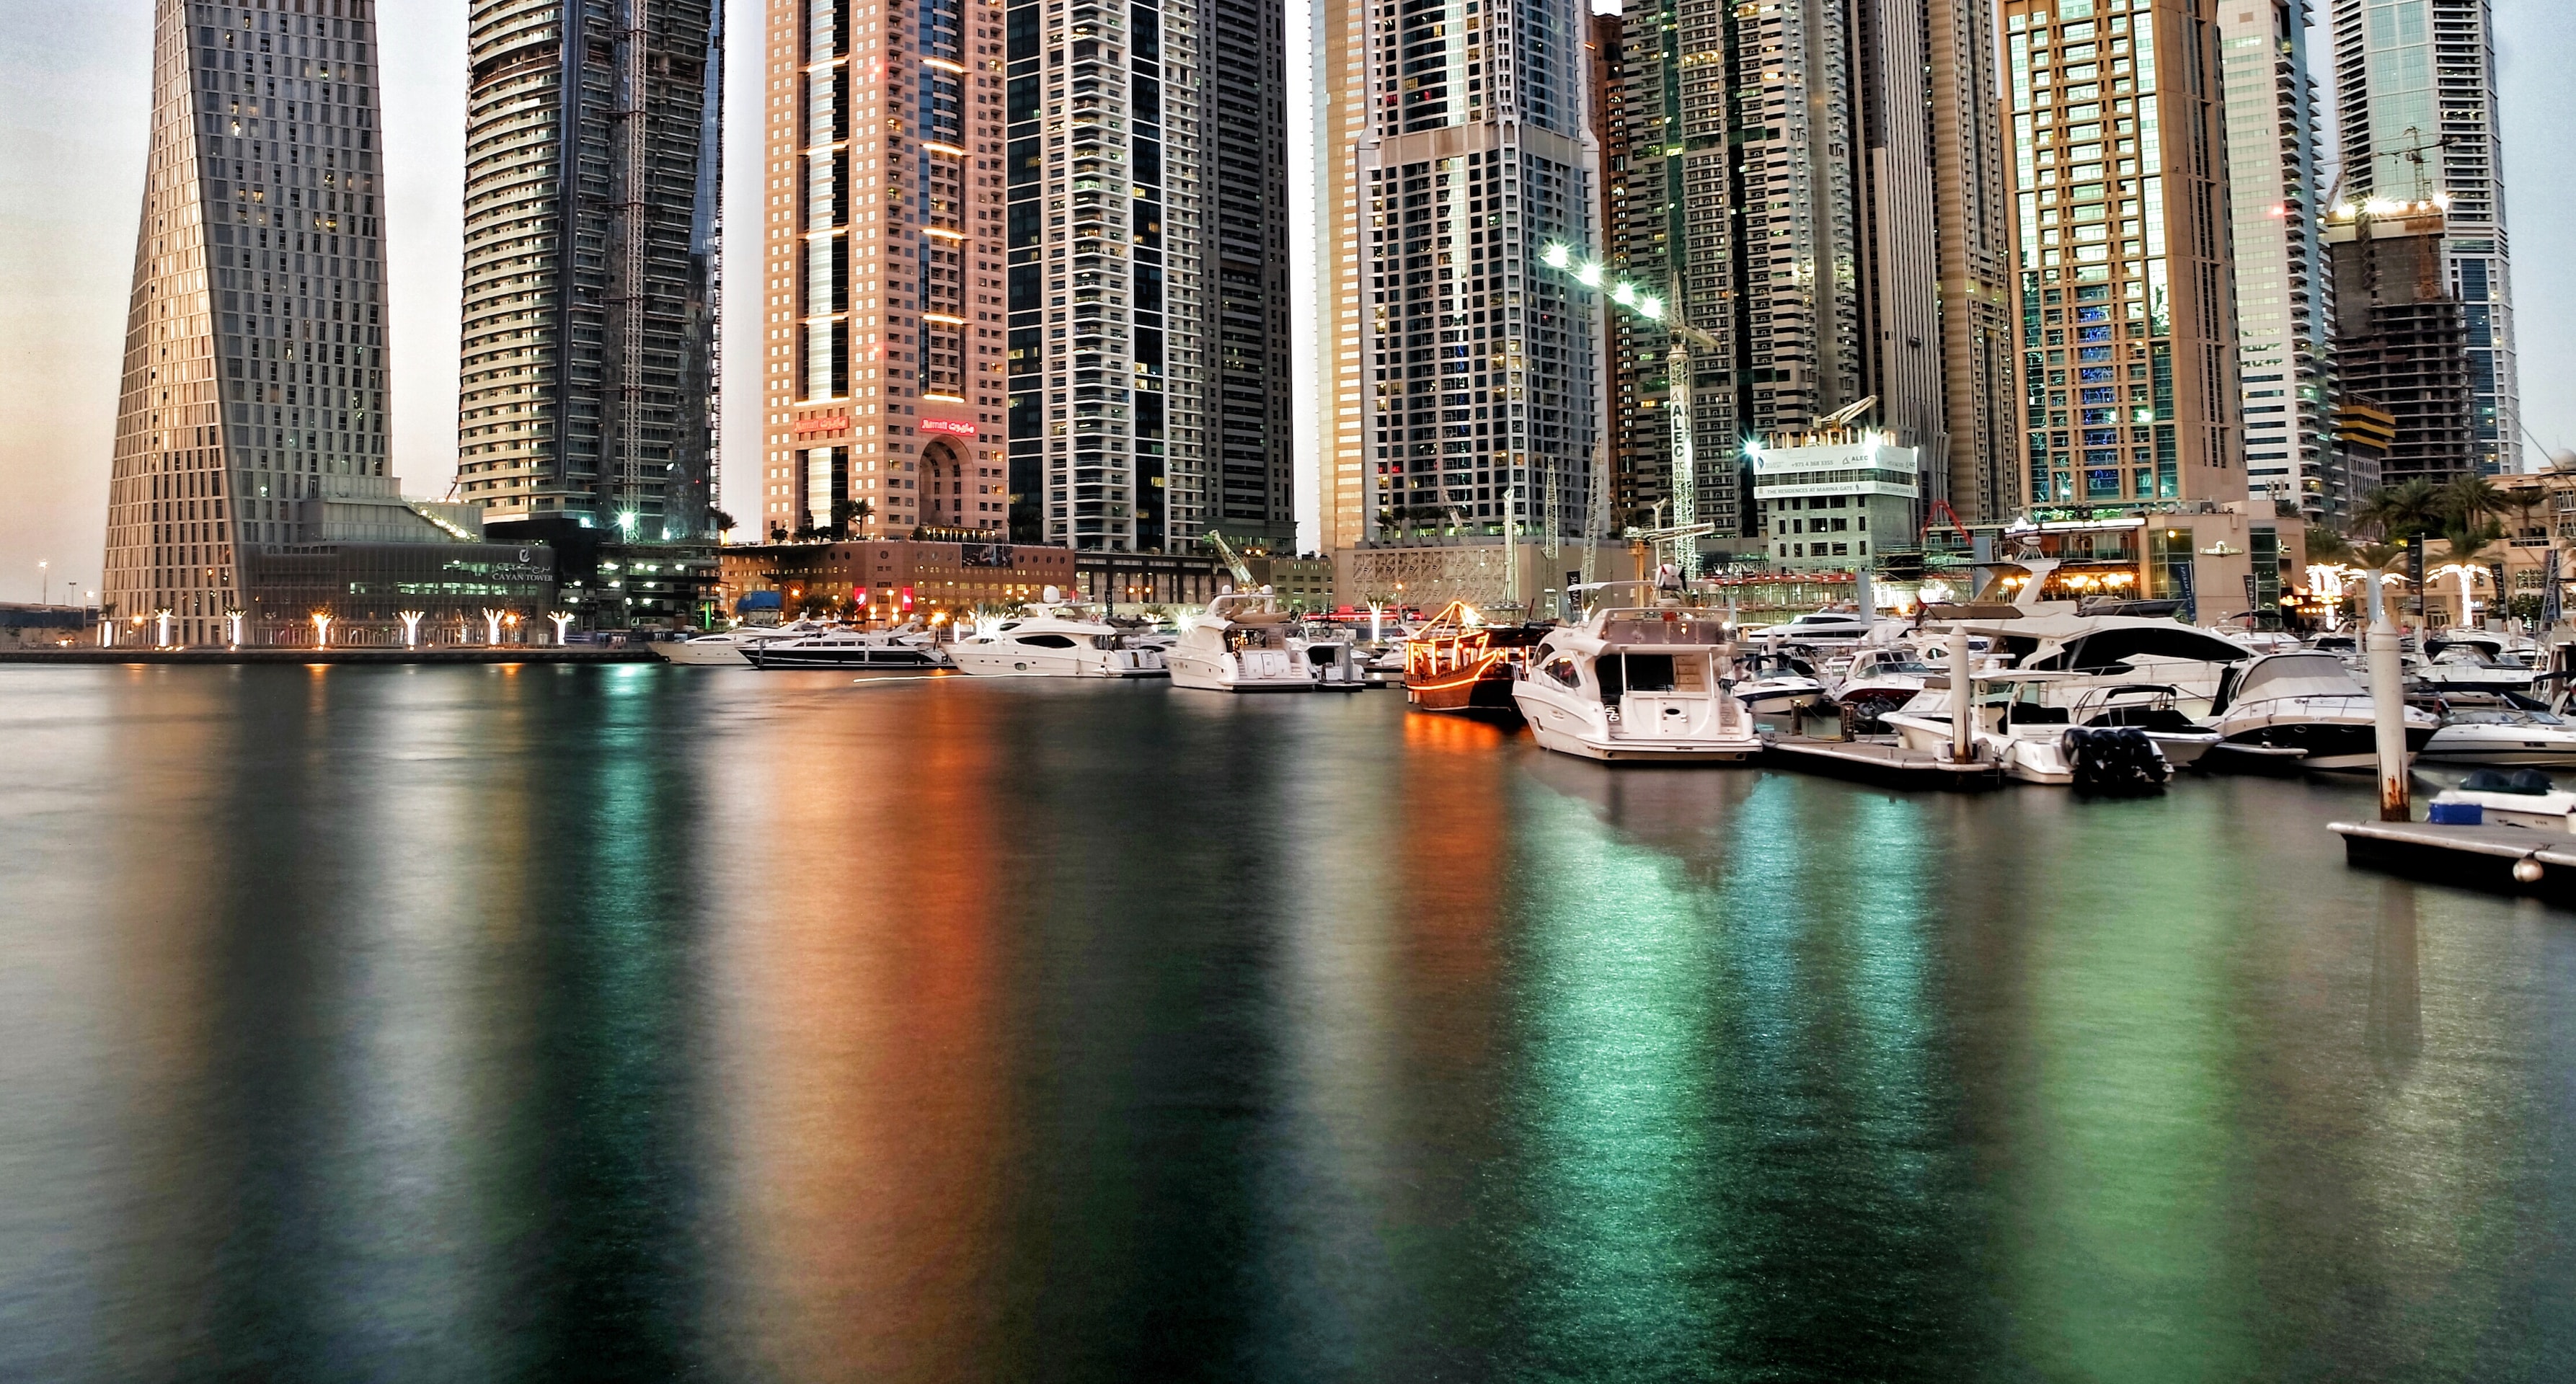 How long can you stay in Dubai if you own a property?